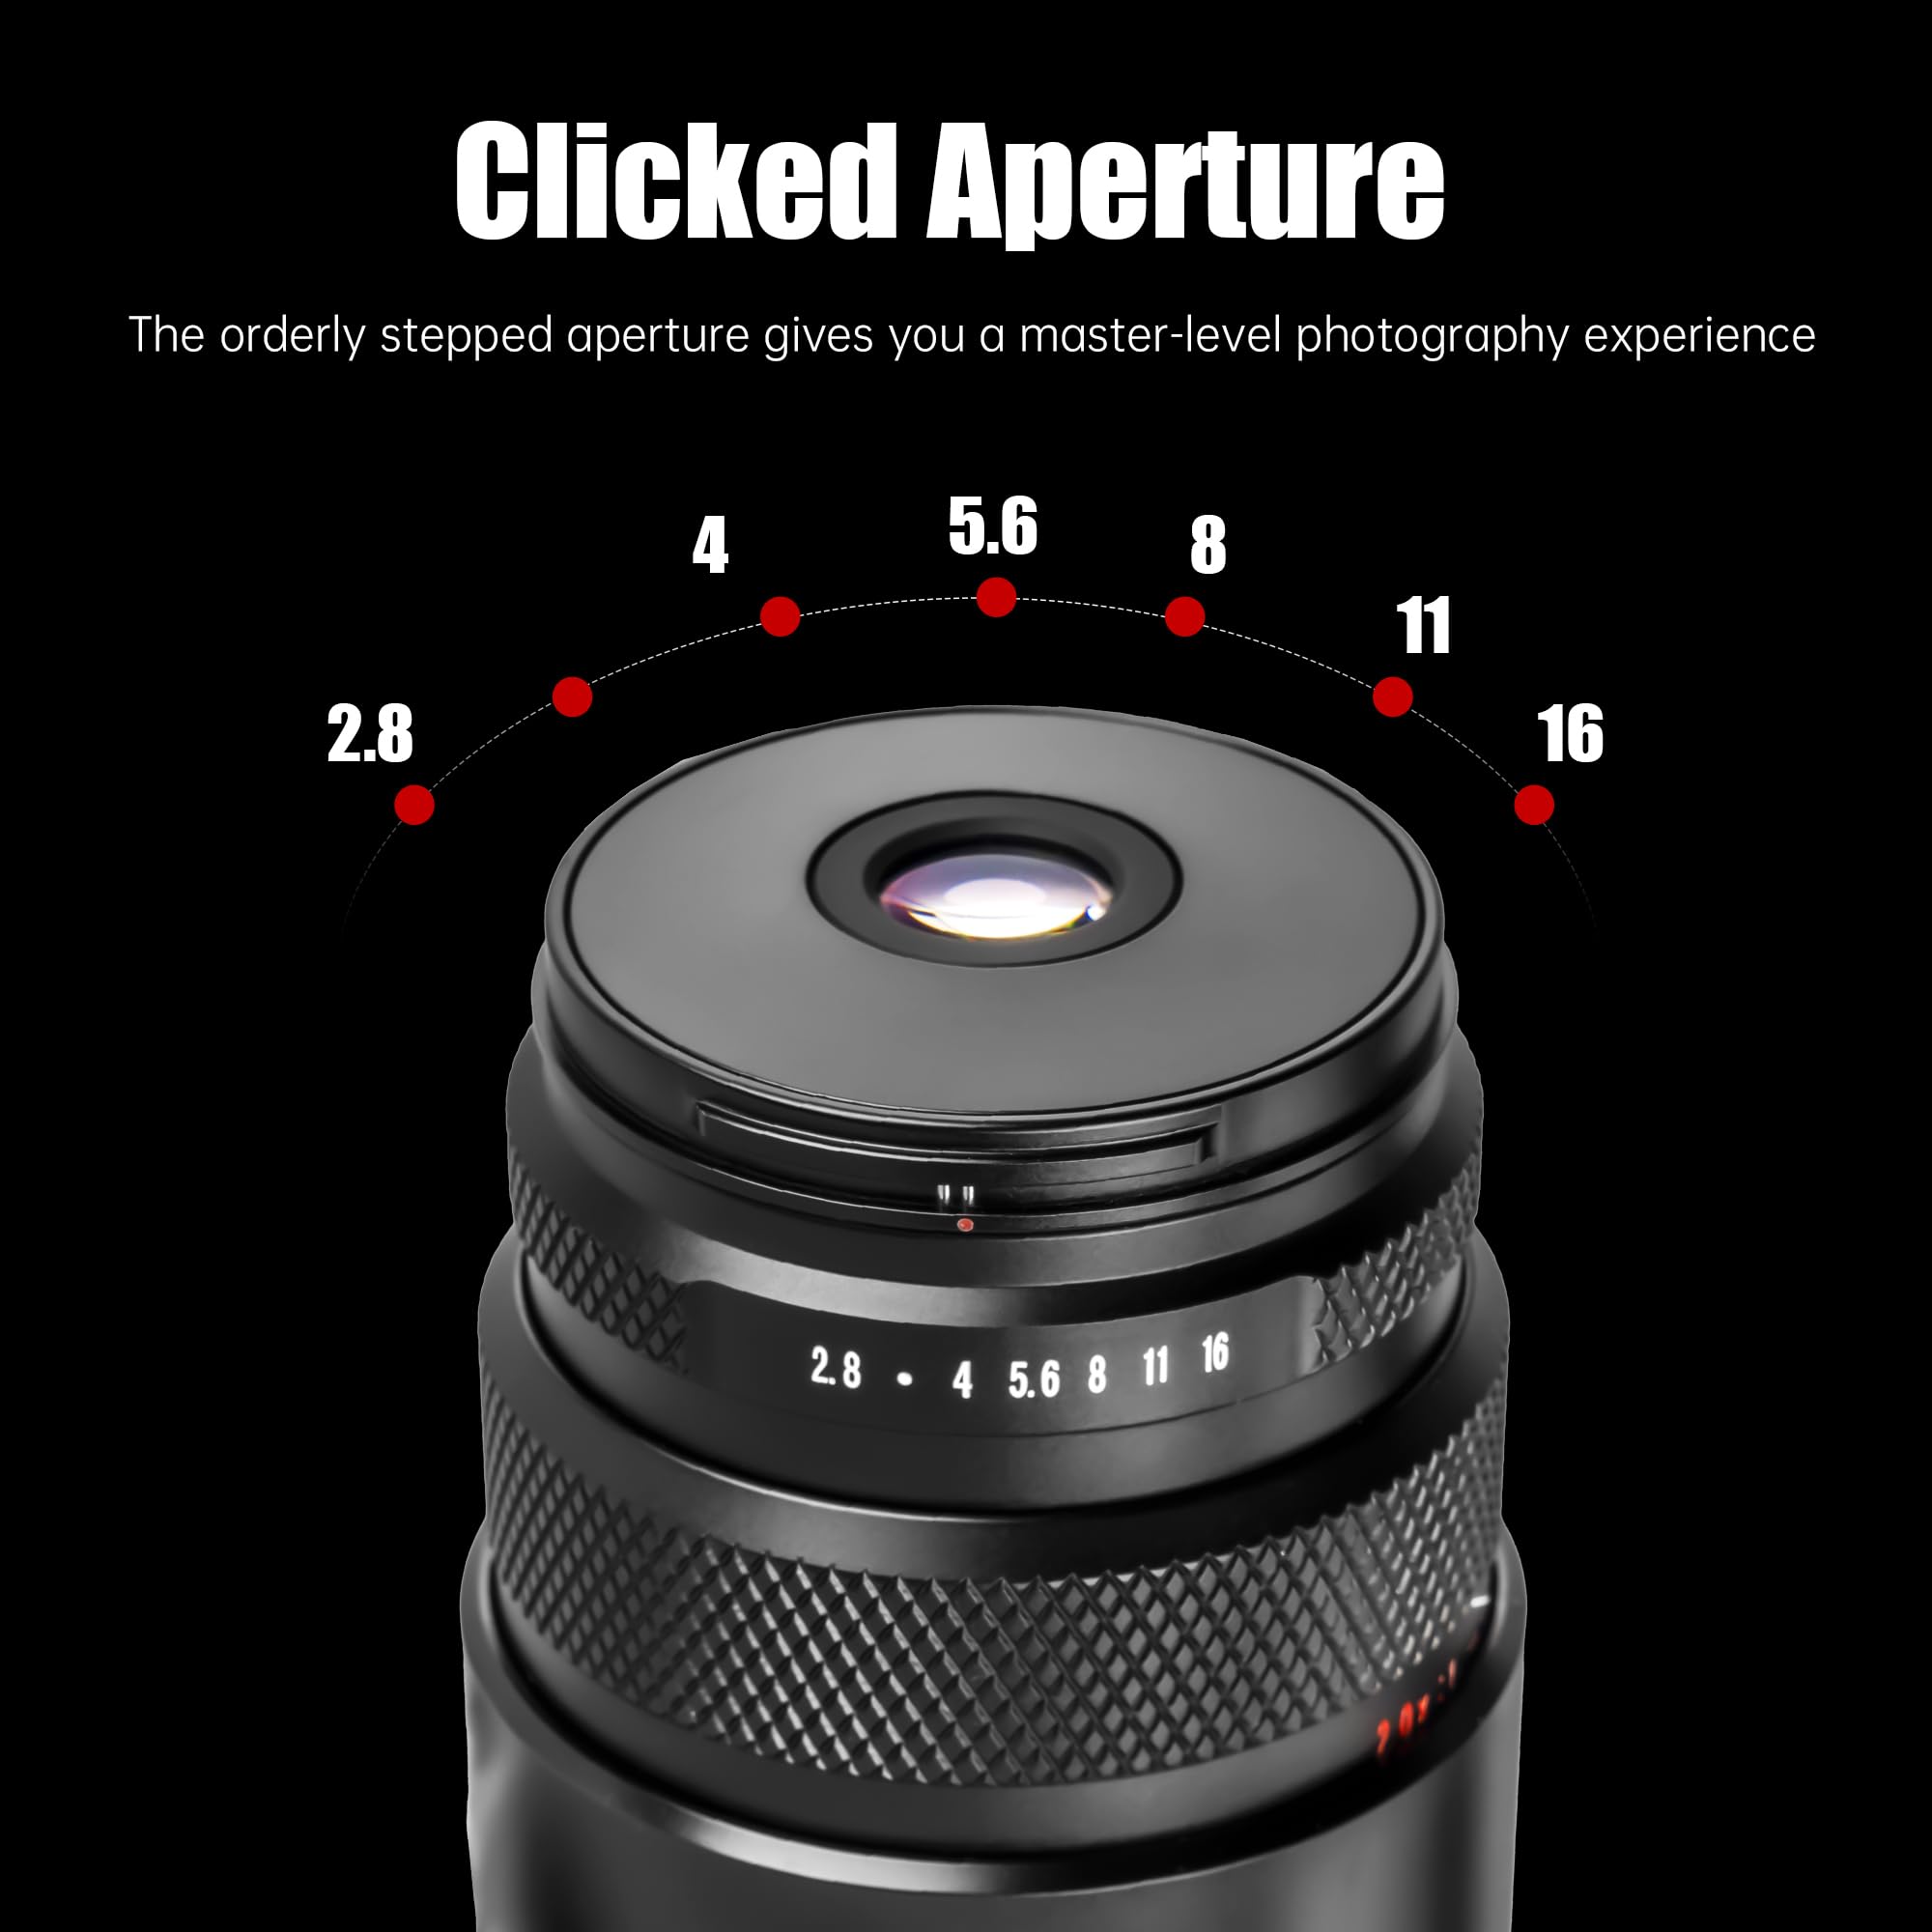 AstrHori 25mm F2.8 2-5X Ultra Macro Lens, Compatible with Full-Frame Sony E-Mount Mirrorless Cameras Alpha a7 a7II a7III a7R a7RII a7RIII a7RIV a7S a7SII a9 a7C